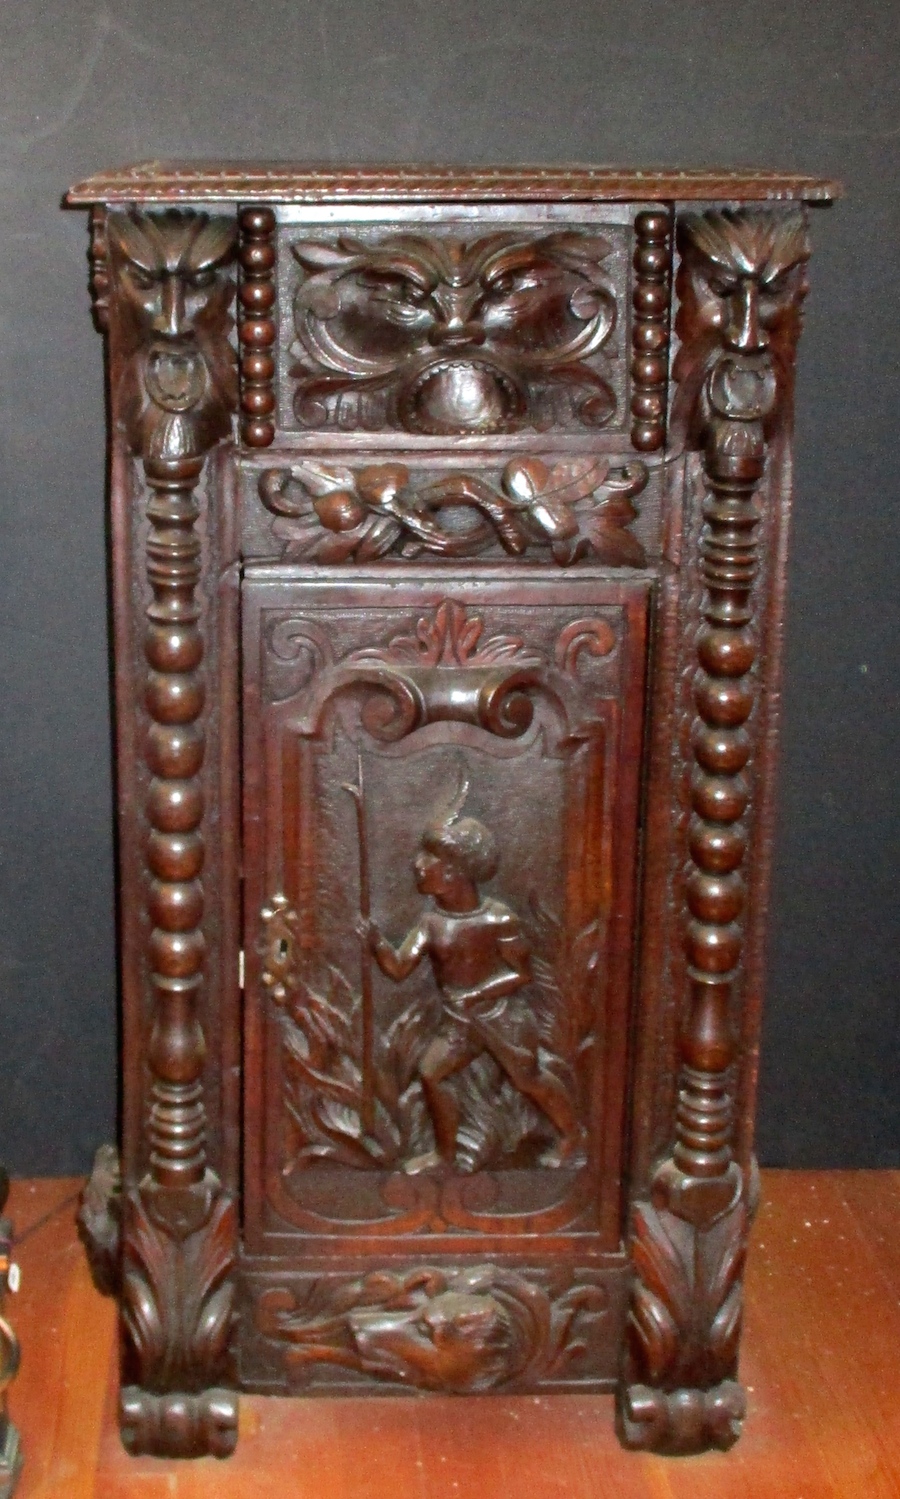 19th Century English Colonial Chest w/Mythological & Indigenous Figures (18" W x 14" D x 35 1/2" H)